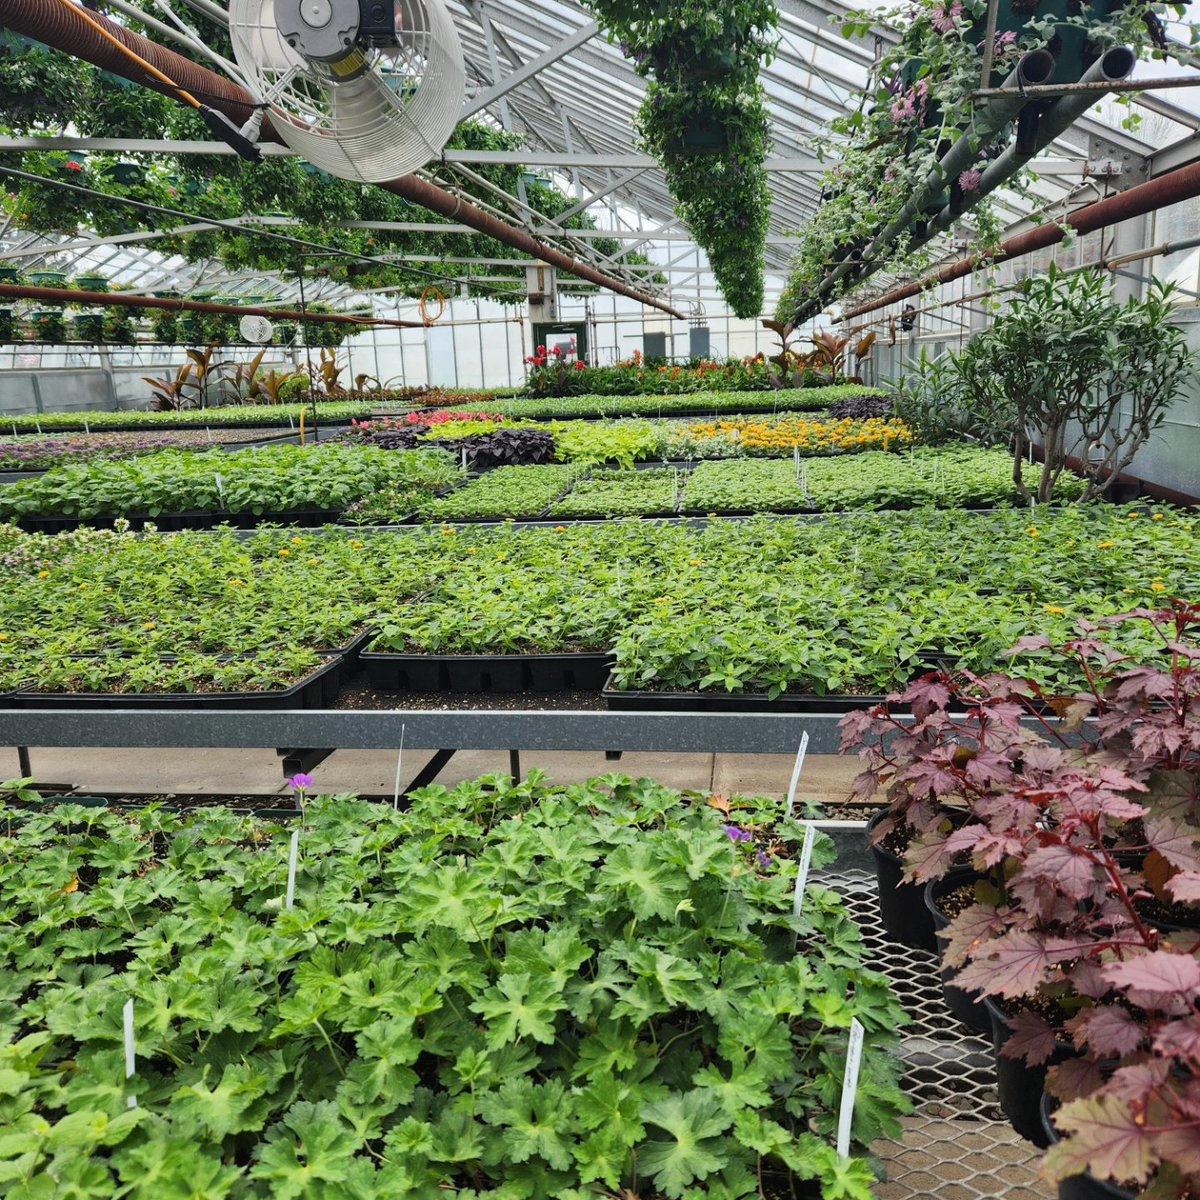 #CityofOshawaParksGreenhouse, located at 919 #FarewellAvenue, in #Oshawa, #Ontario, is a hudden gem and one of a few remaining #glass #greenhouses in the province. It houses seedlings, tropicals, and arrangements which adorn our cityscapes #ttotr.